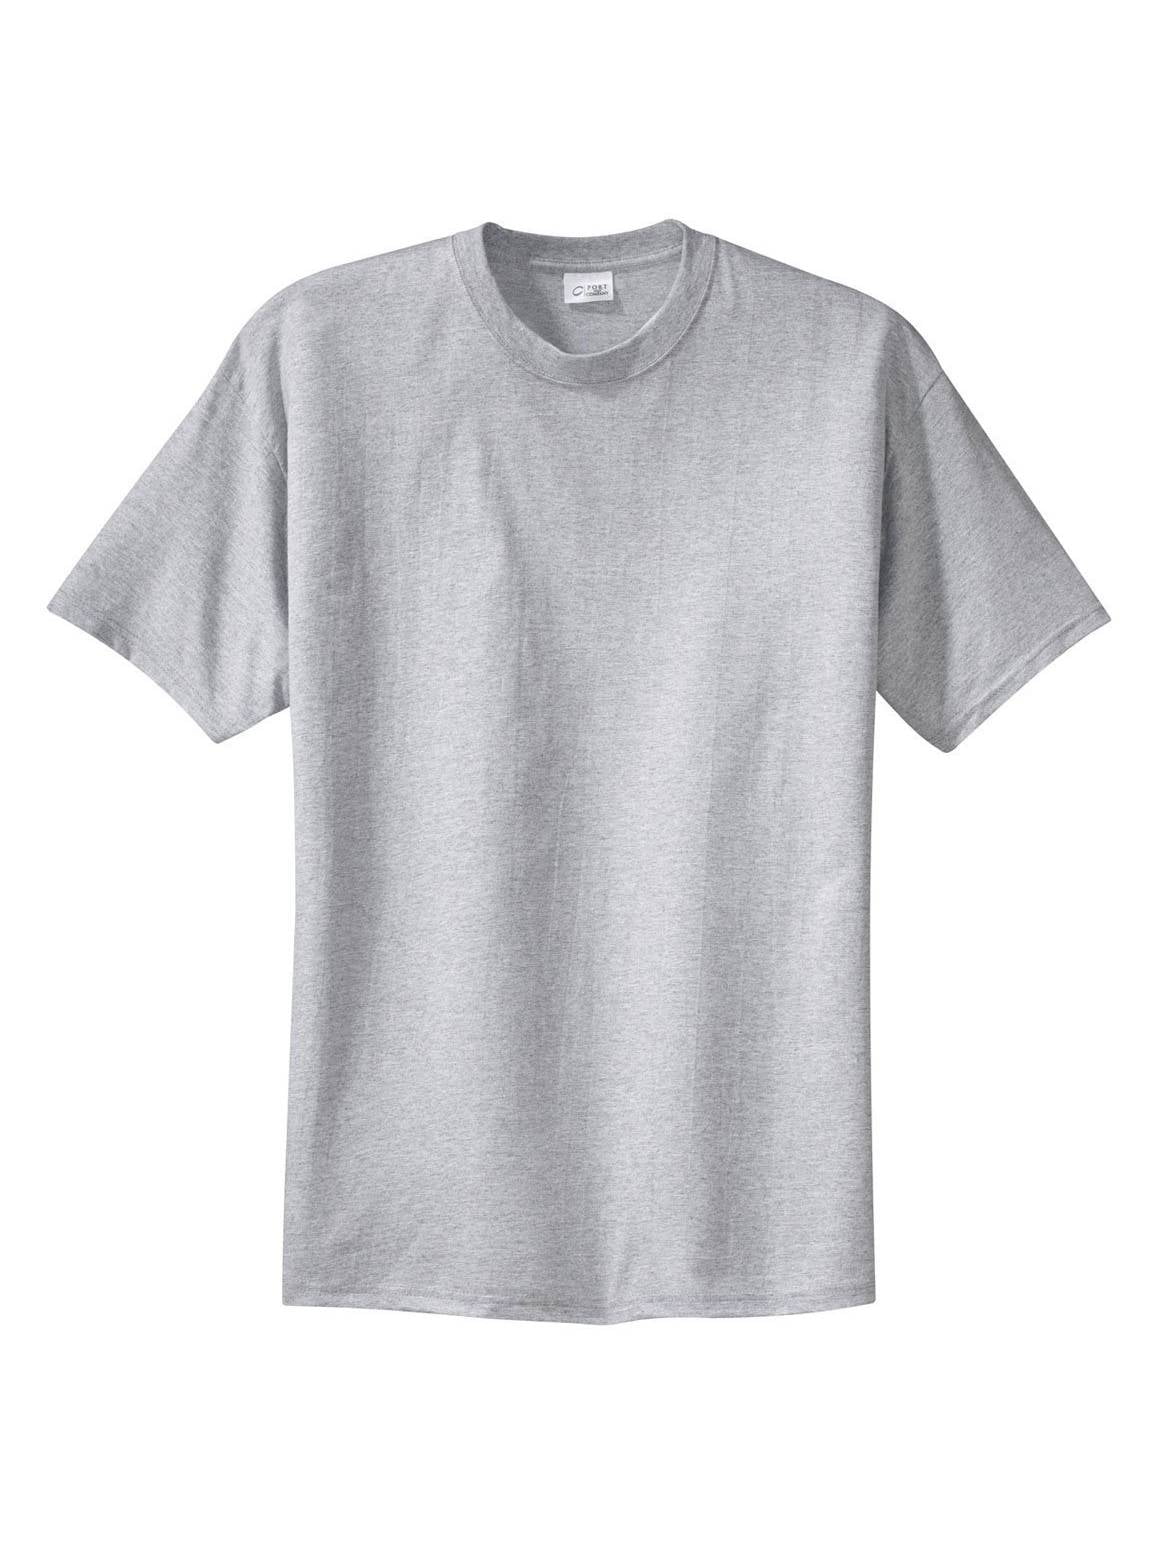  Port & Company Ladies Essential 100% Cotton T-Shirt, Light  Blue, Large : Clothing, Shoes & Jewelry